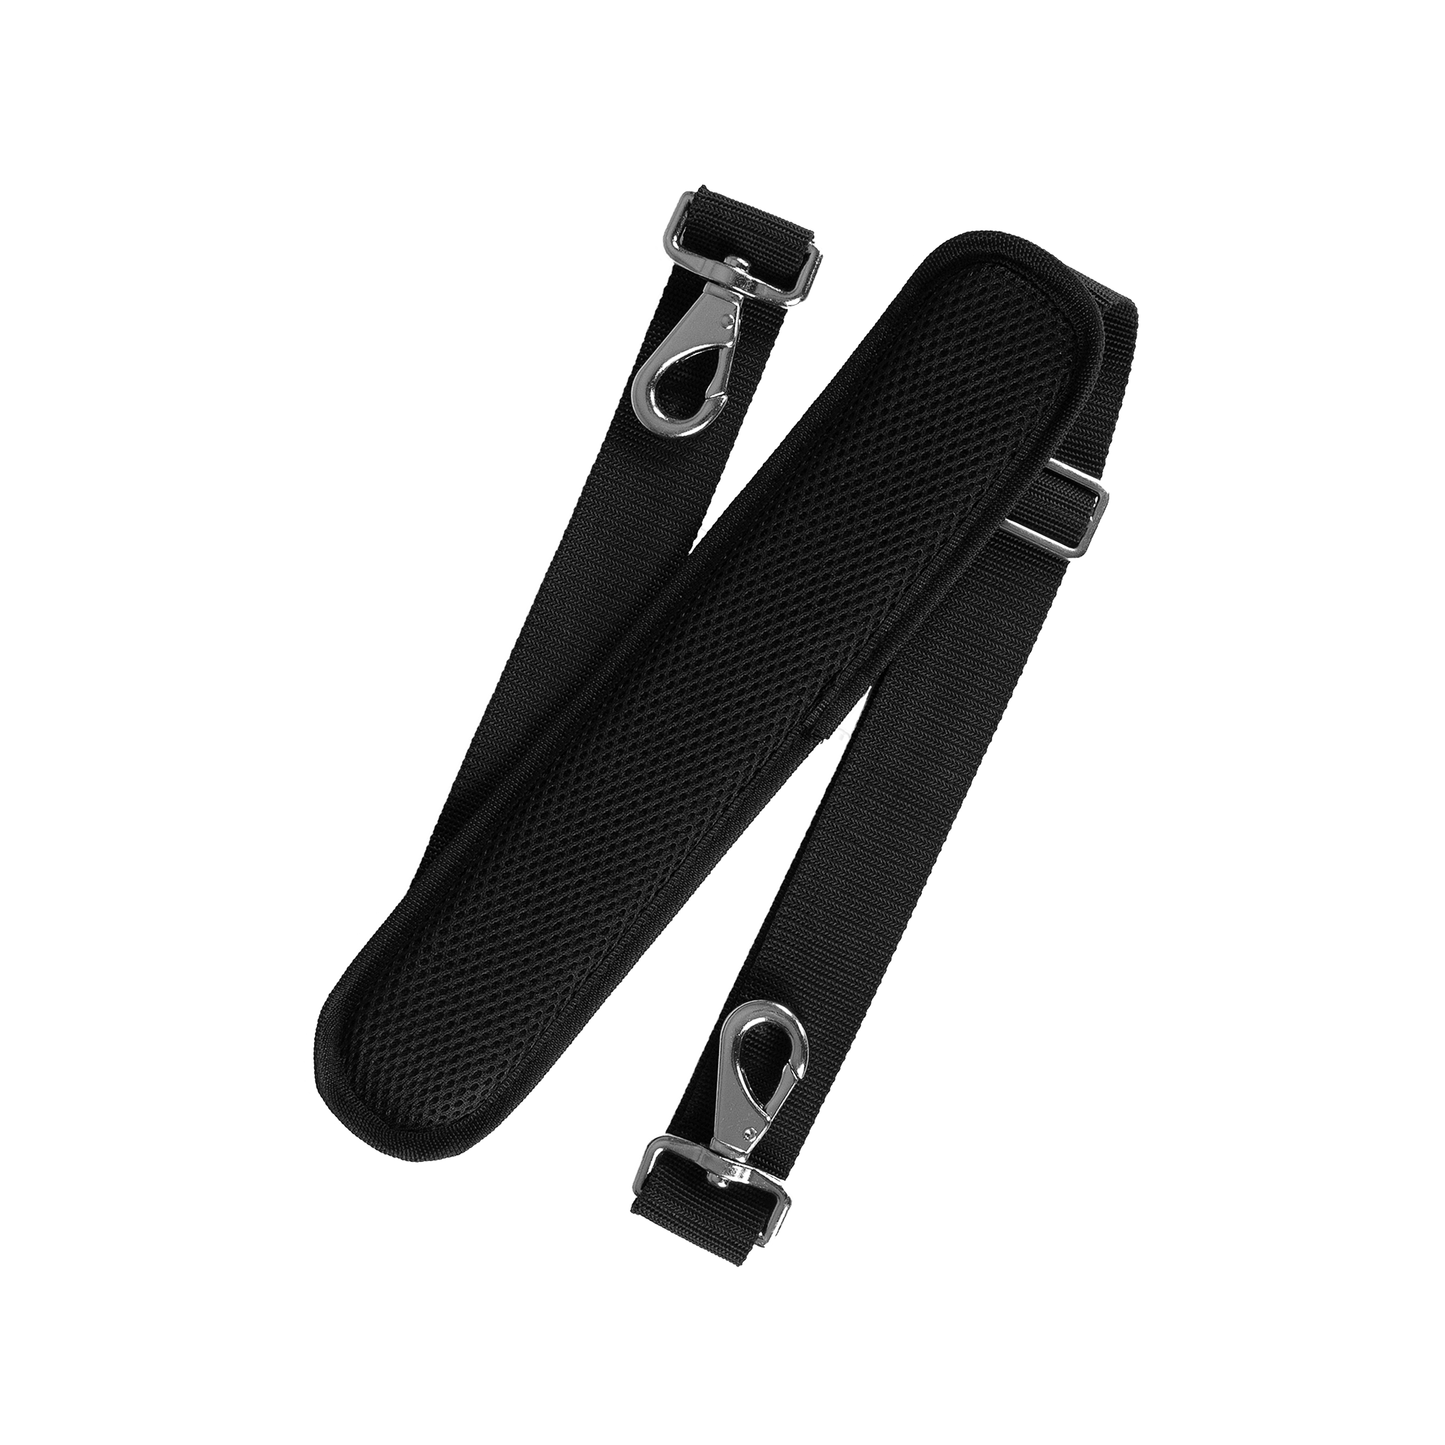 Padded strap for Pedaltrain XD-18.